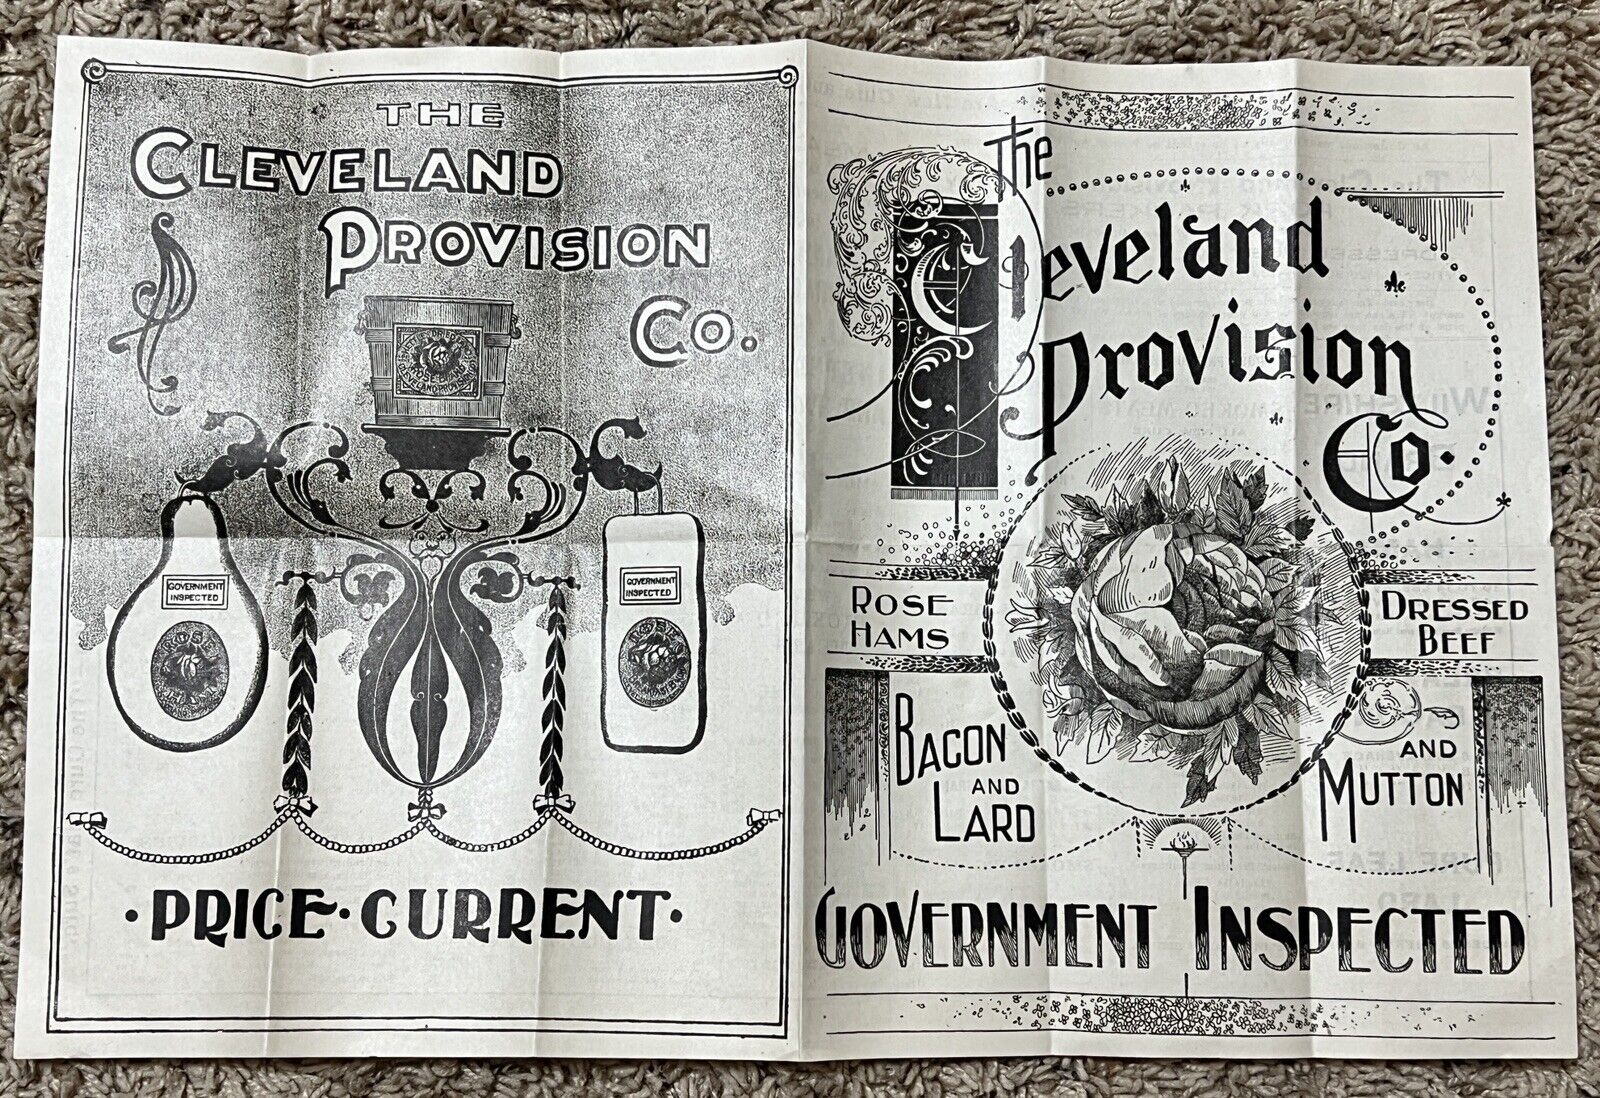 THE CLEVELAND PROVISION CO. GOVERNMENT INSPECTED FOLDED AD EPHEMERA PAPER